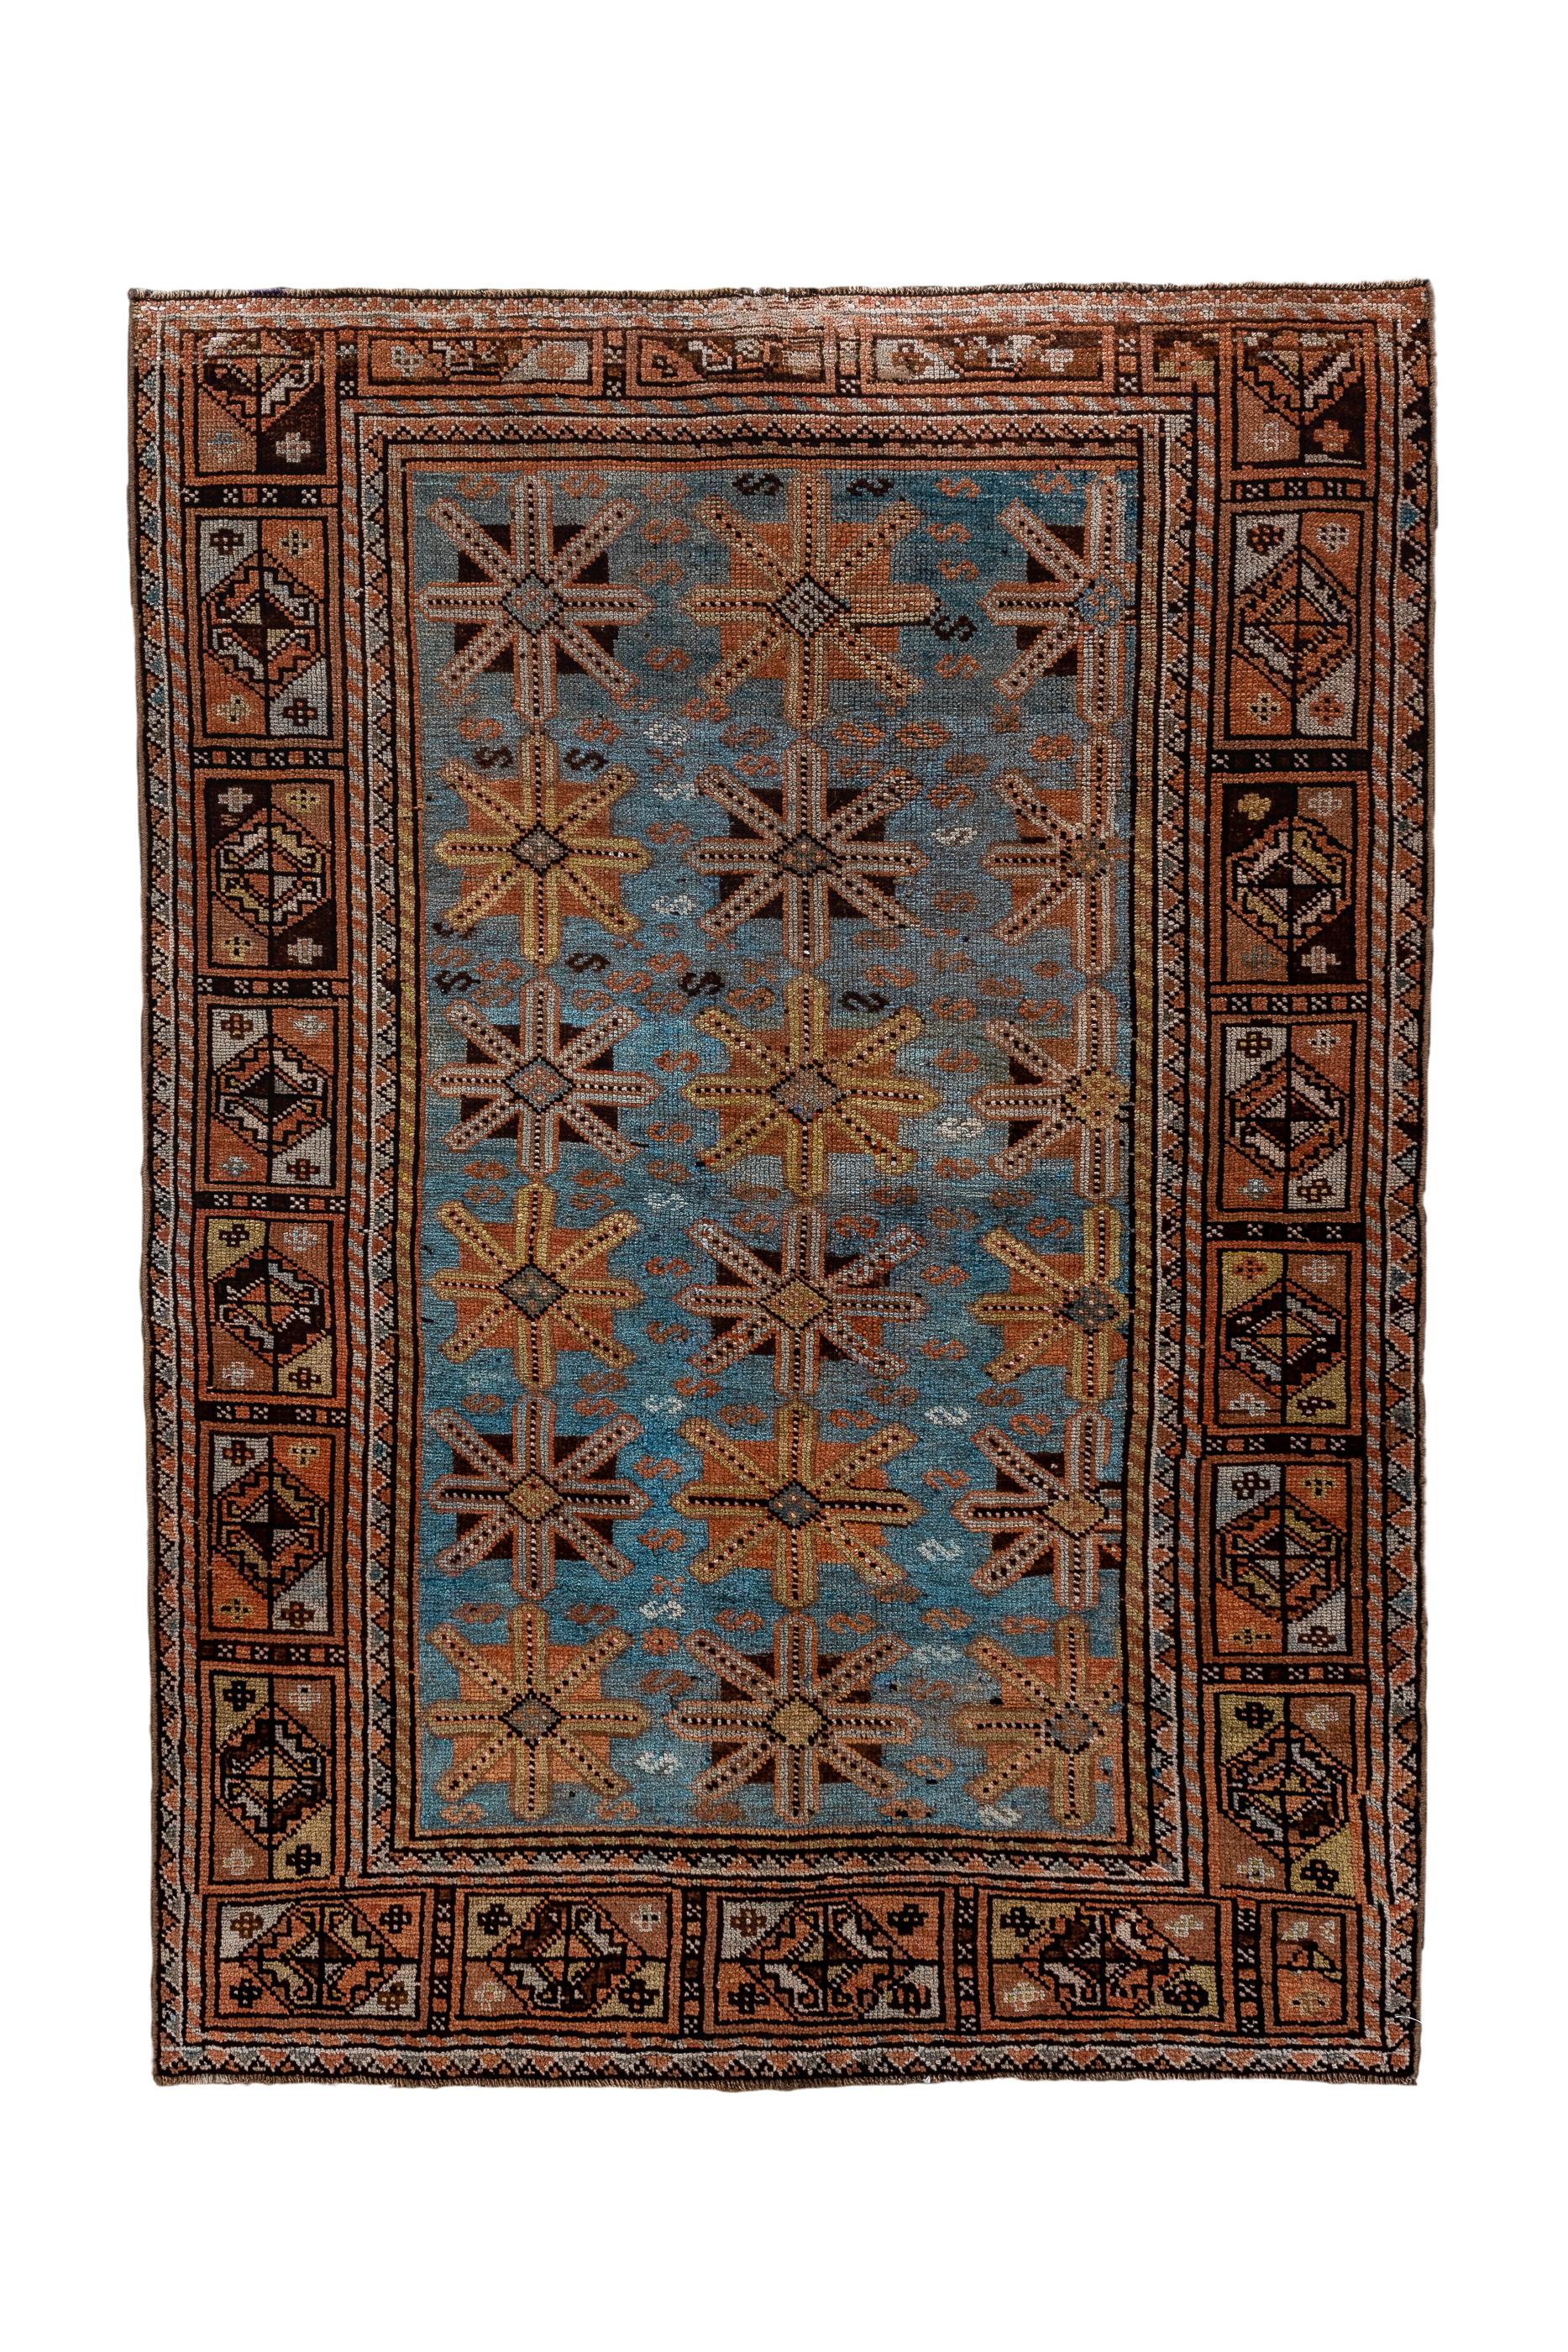 Looks like a Baluchi version of a Turkmen rug, but with a cerulean blue field it is probably Kurdish, with three columns of simple “Union Jack” guls, and a border adapted from the “Aina gul” Turkmen pattern as well. Straw, blue and ecru touches.